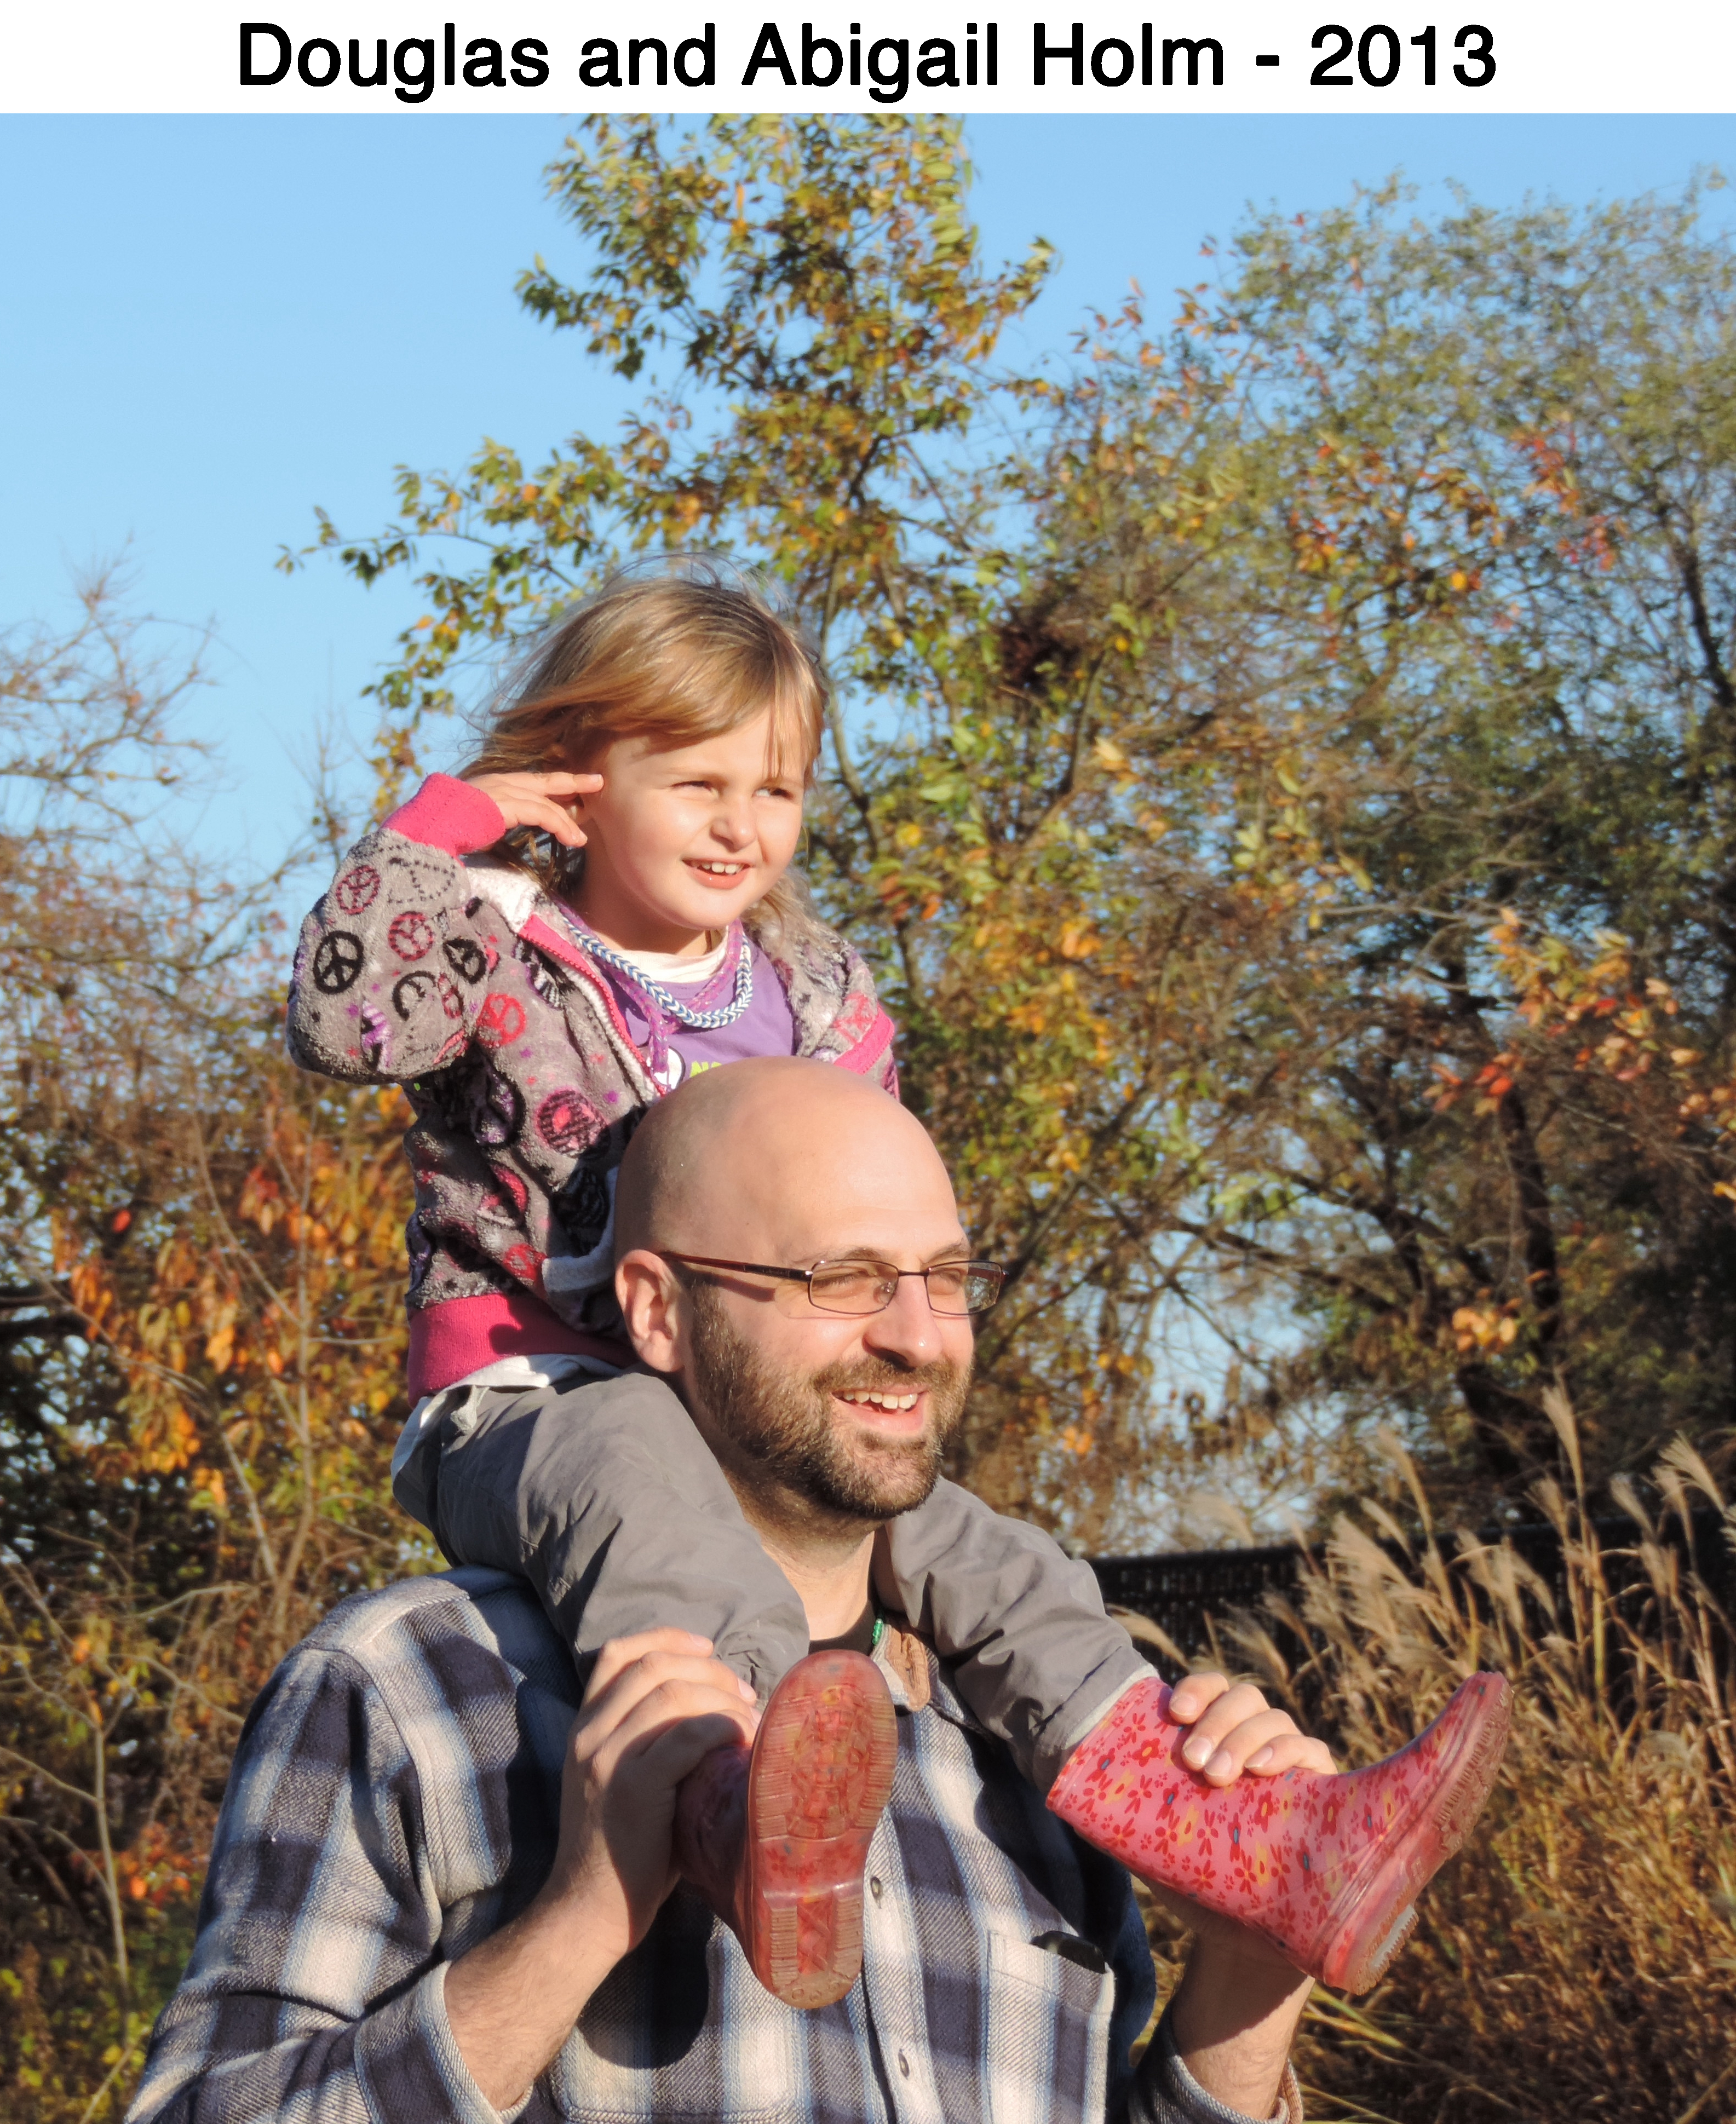 Doug Holm is giving his daughter Abby a ride on his shoulders